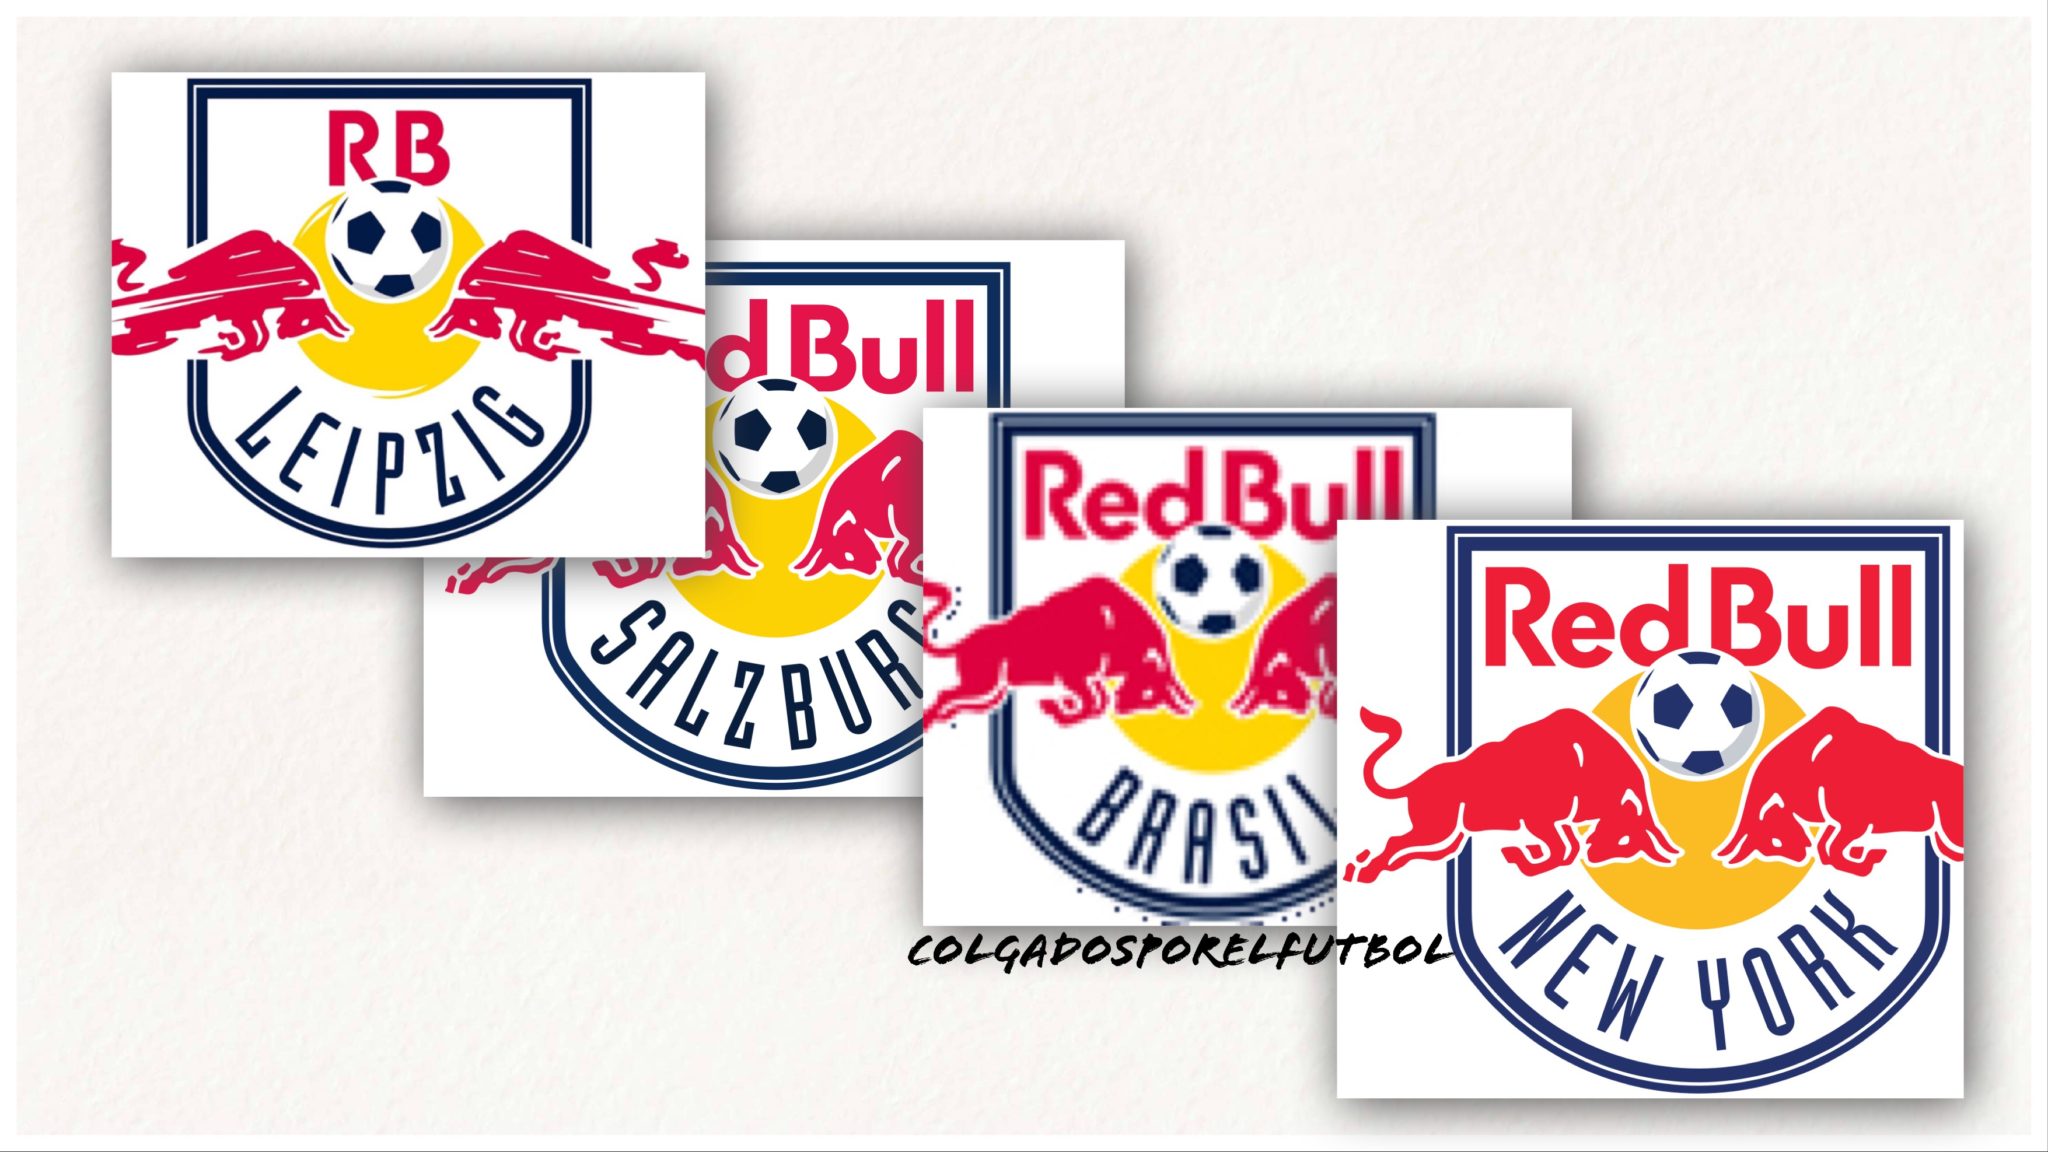 Evolution or demise? Red Bull have created a complex situation | OffTheBall